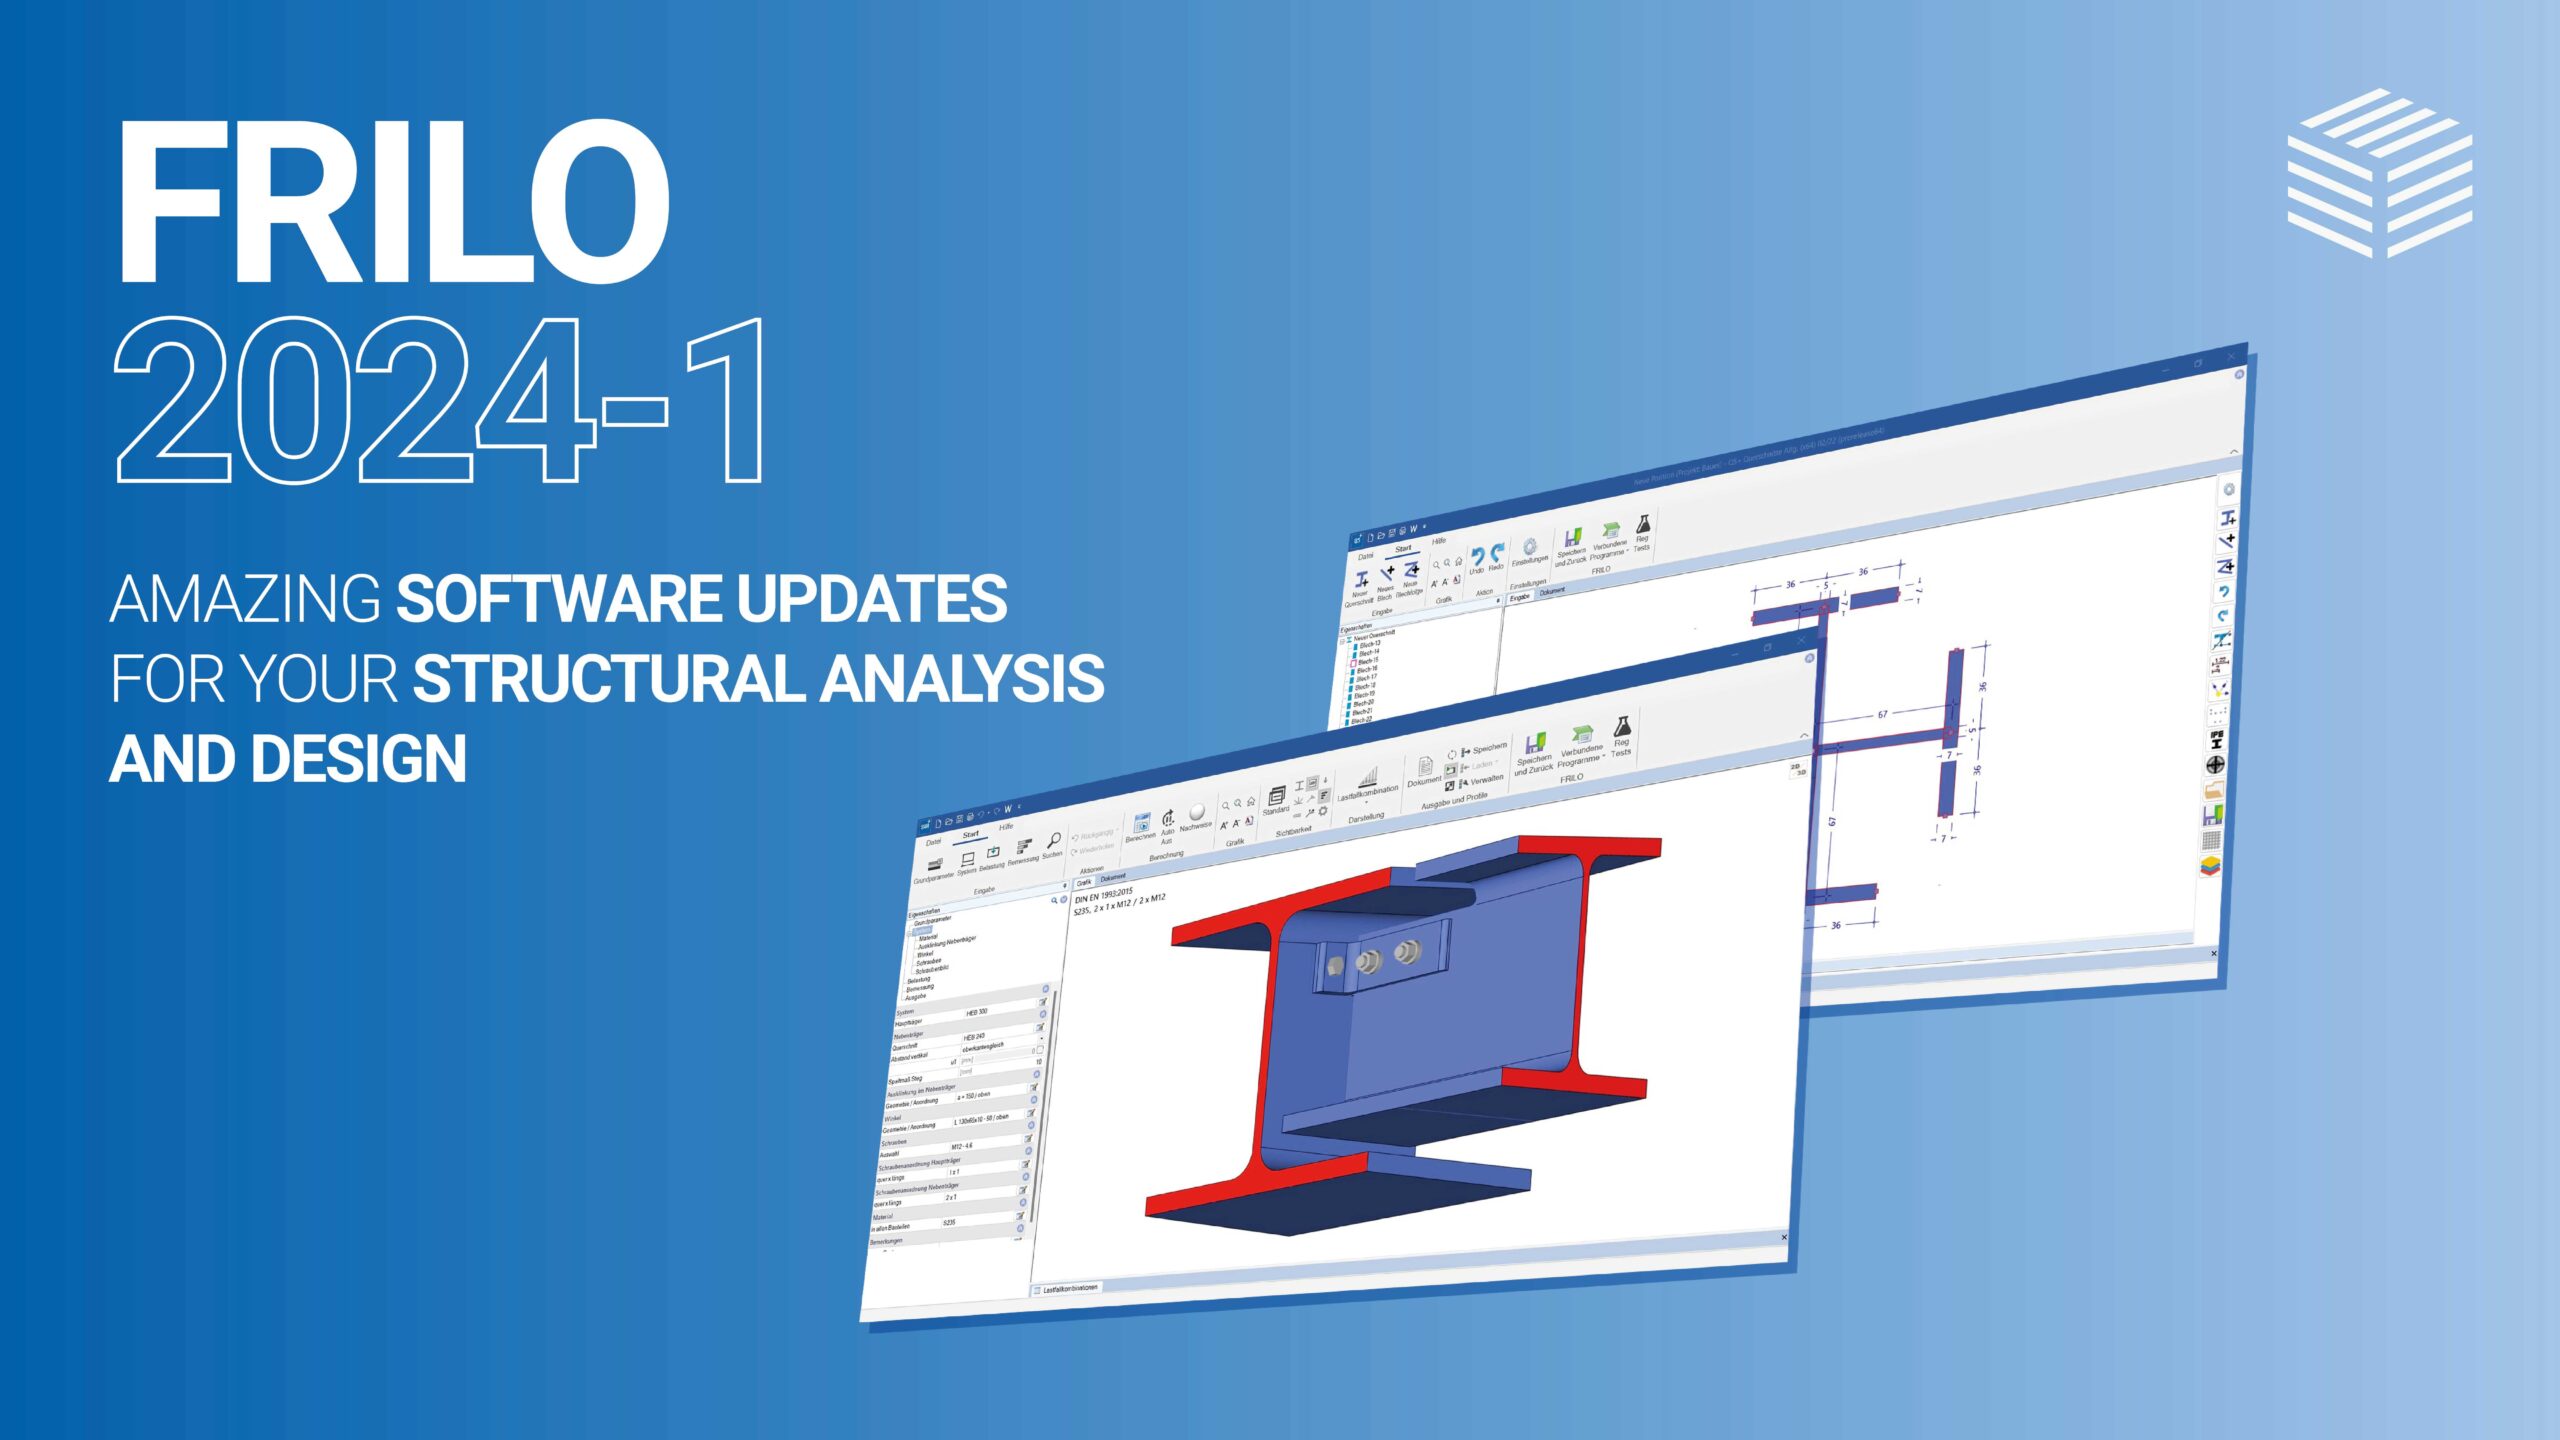 Release 2024-1 | The new FRILO software version